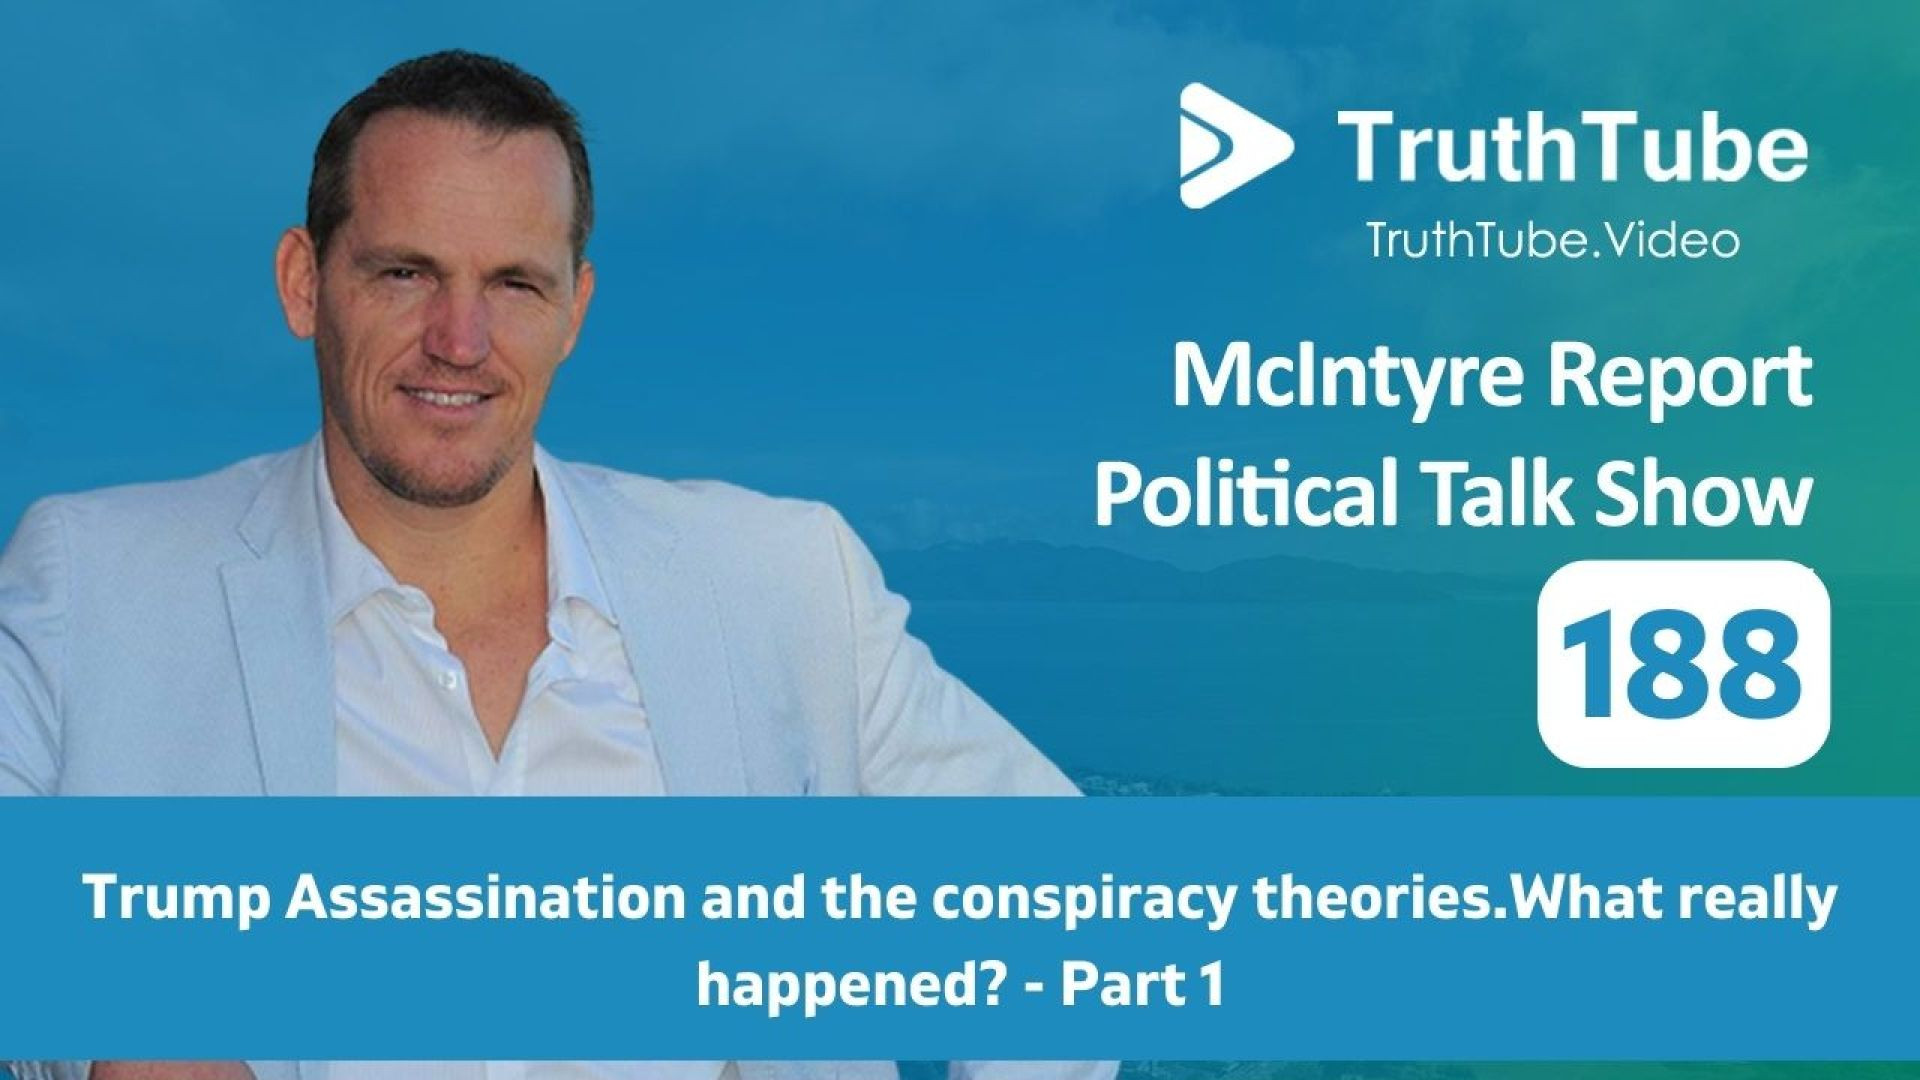 Trump Assassination and the conspiracy theories.What really happened? - Part 1